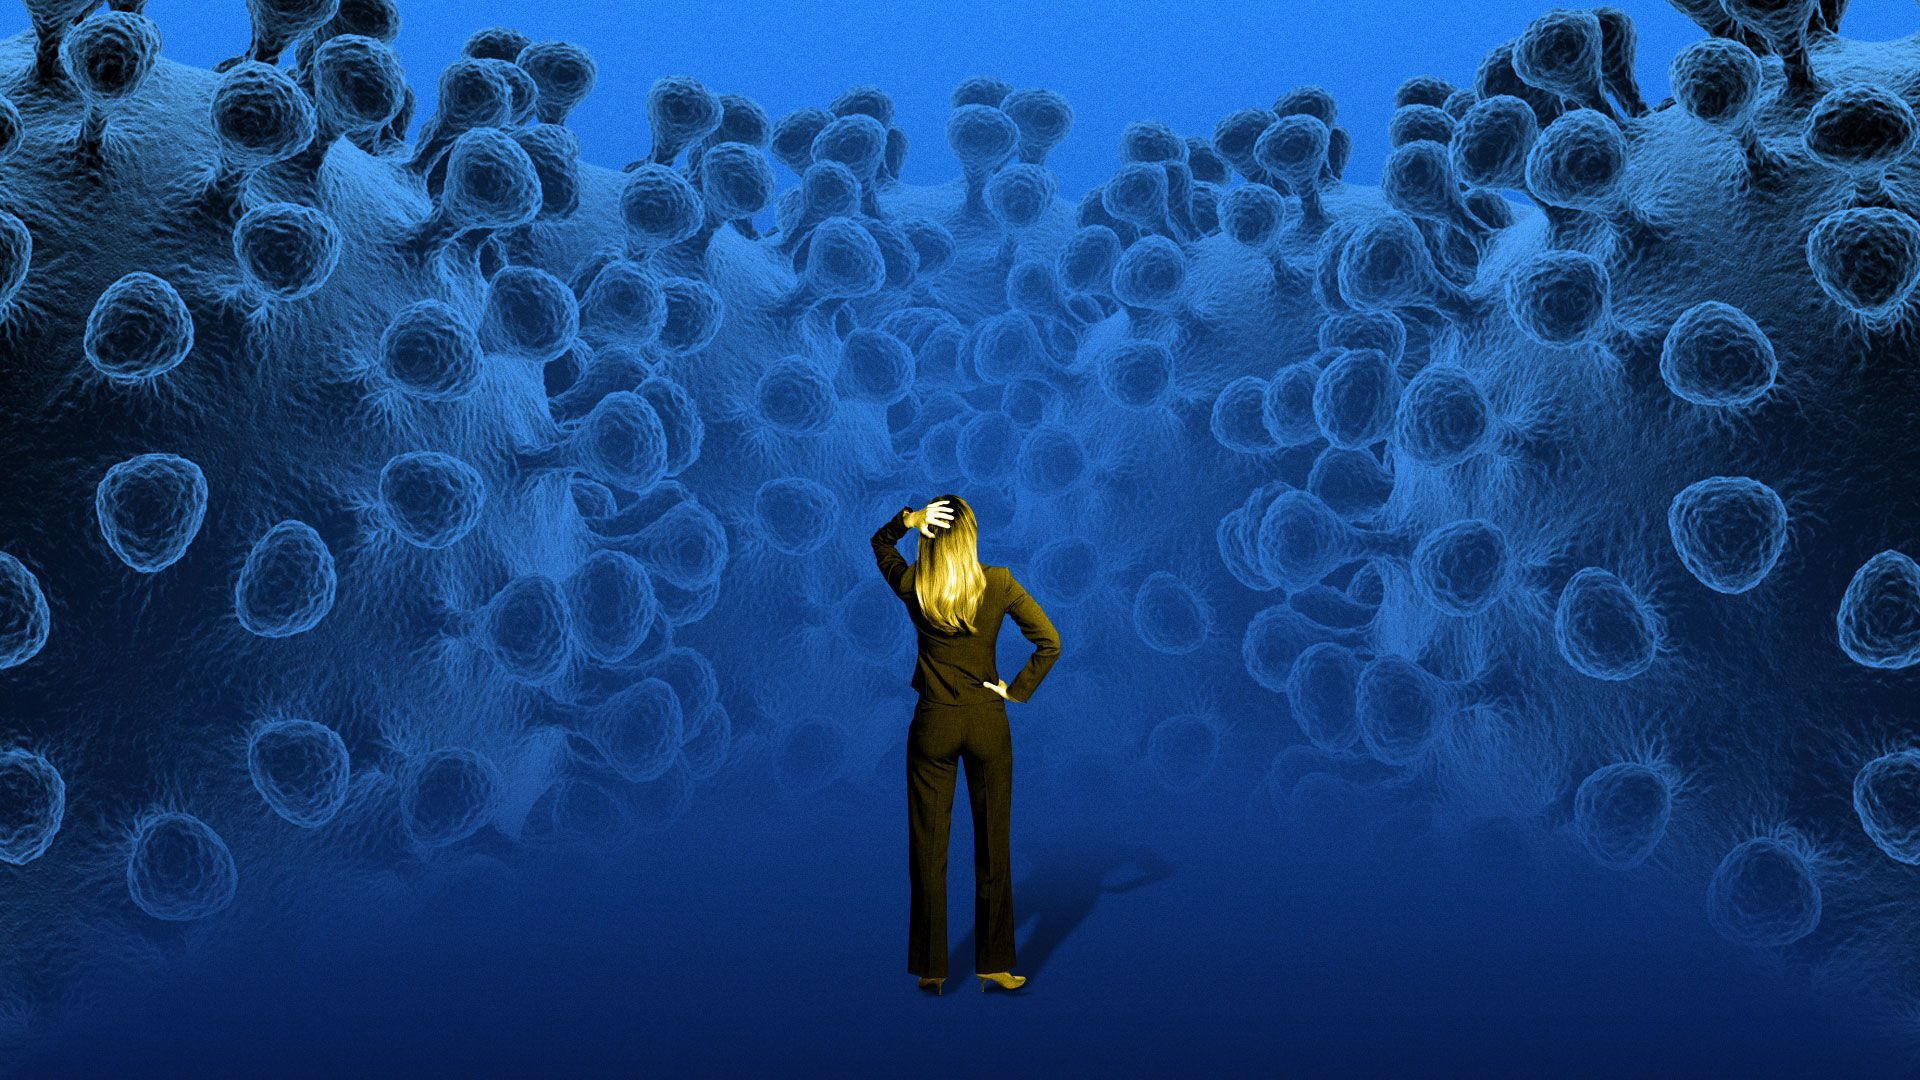 Illustration of person looking up at large viruses